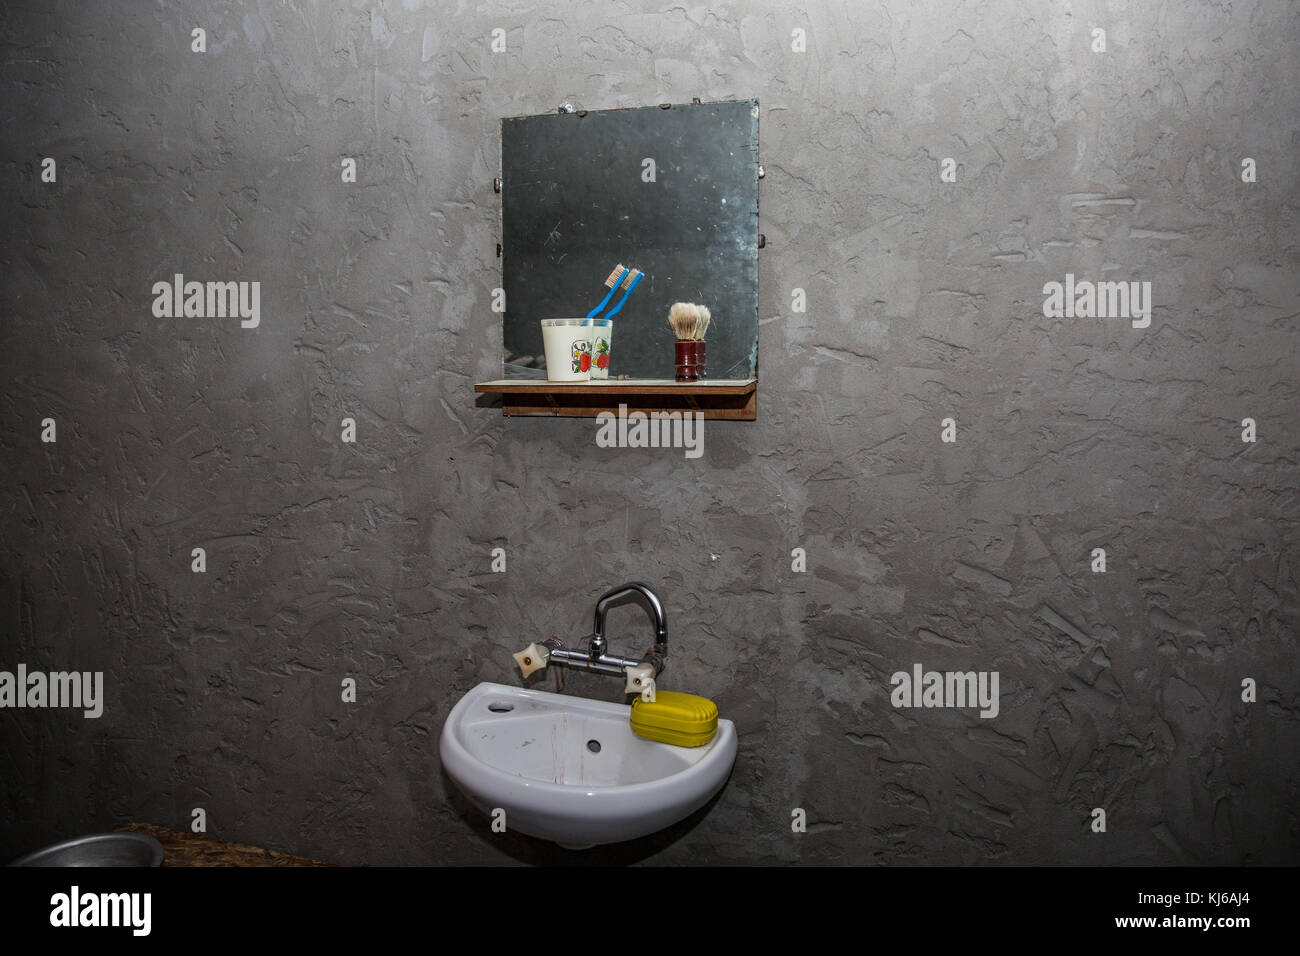 Dirty washbasin in an old poor house. Mirror, tooth count. A dark, sombre abstract scene about poverty and housing problems. Stock Photo